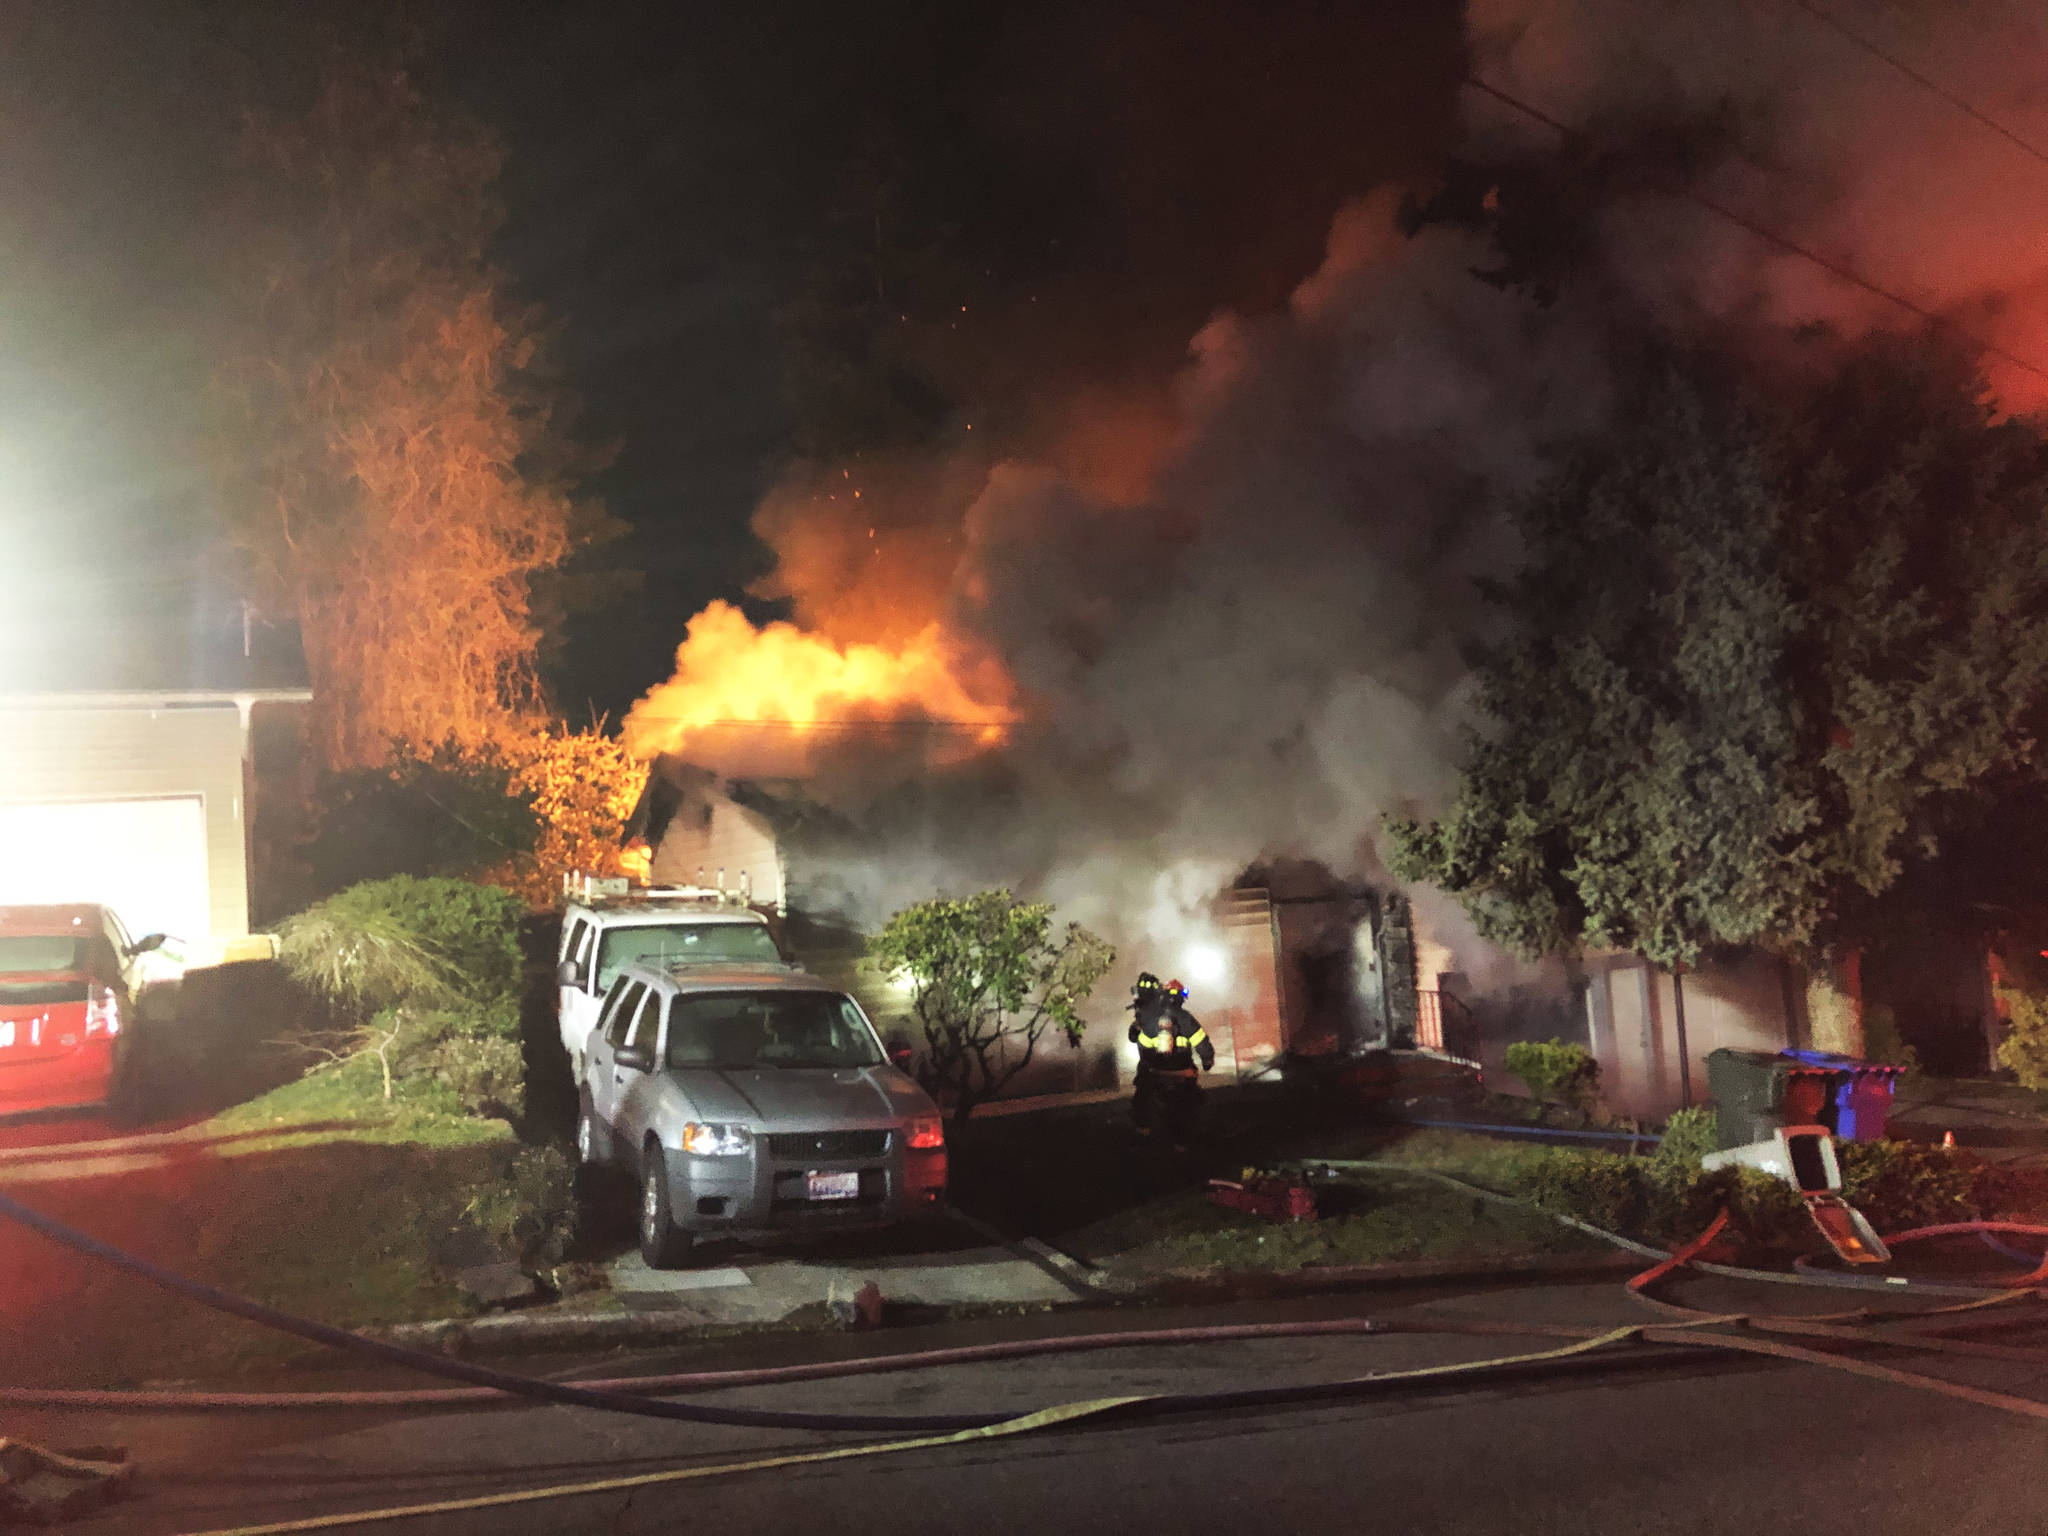 A fire that started in a dryer displaced seven people early Tuesday, March 30 from a Kent home in the 10800 block of SE 236th Street. COURTESY PHOTO, Puget Sound Fire